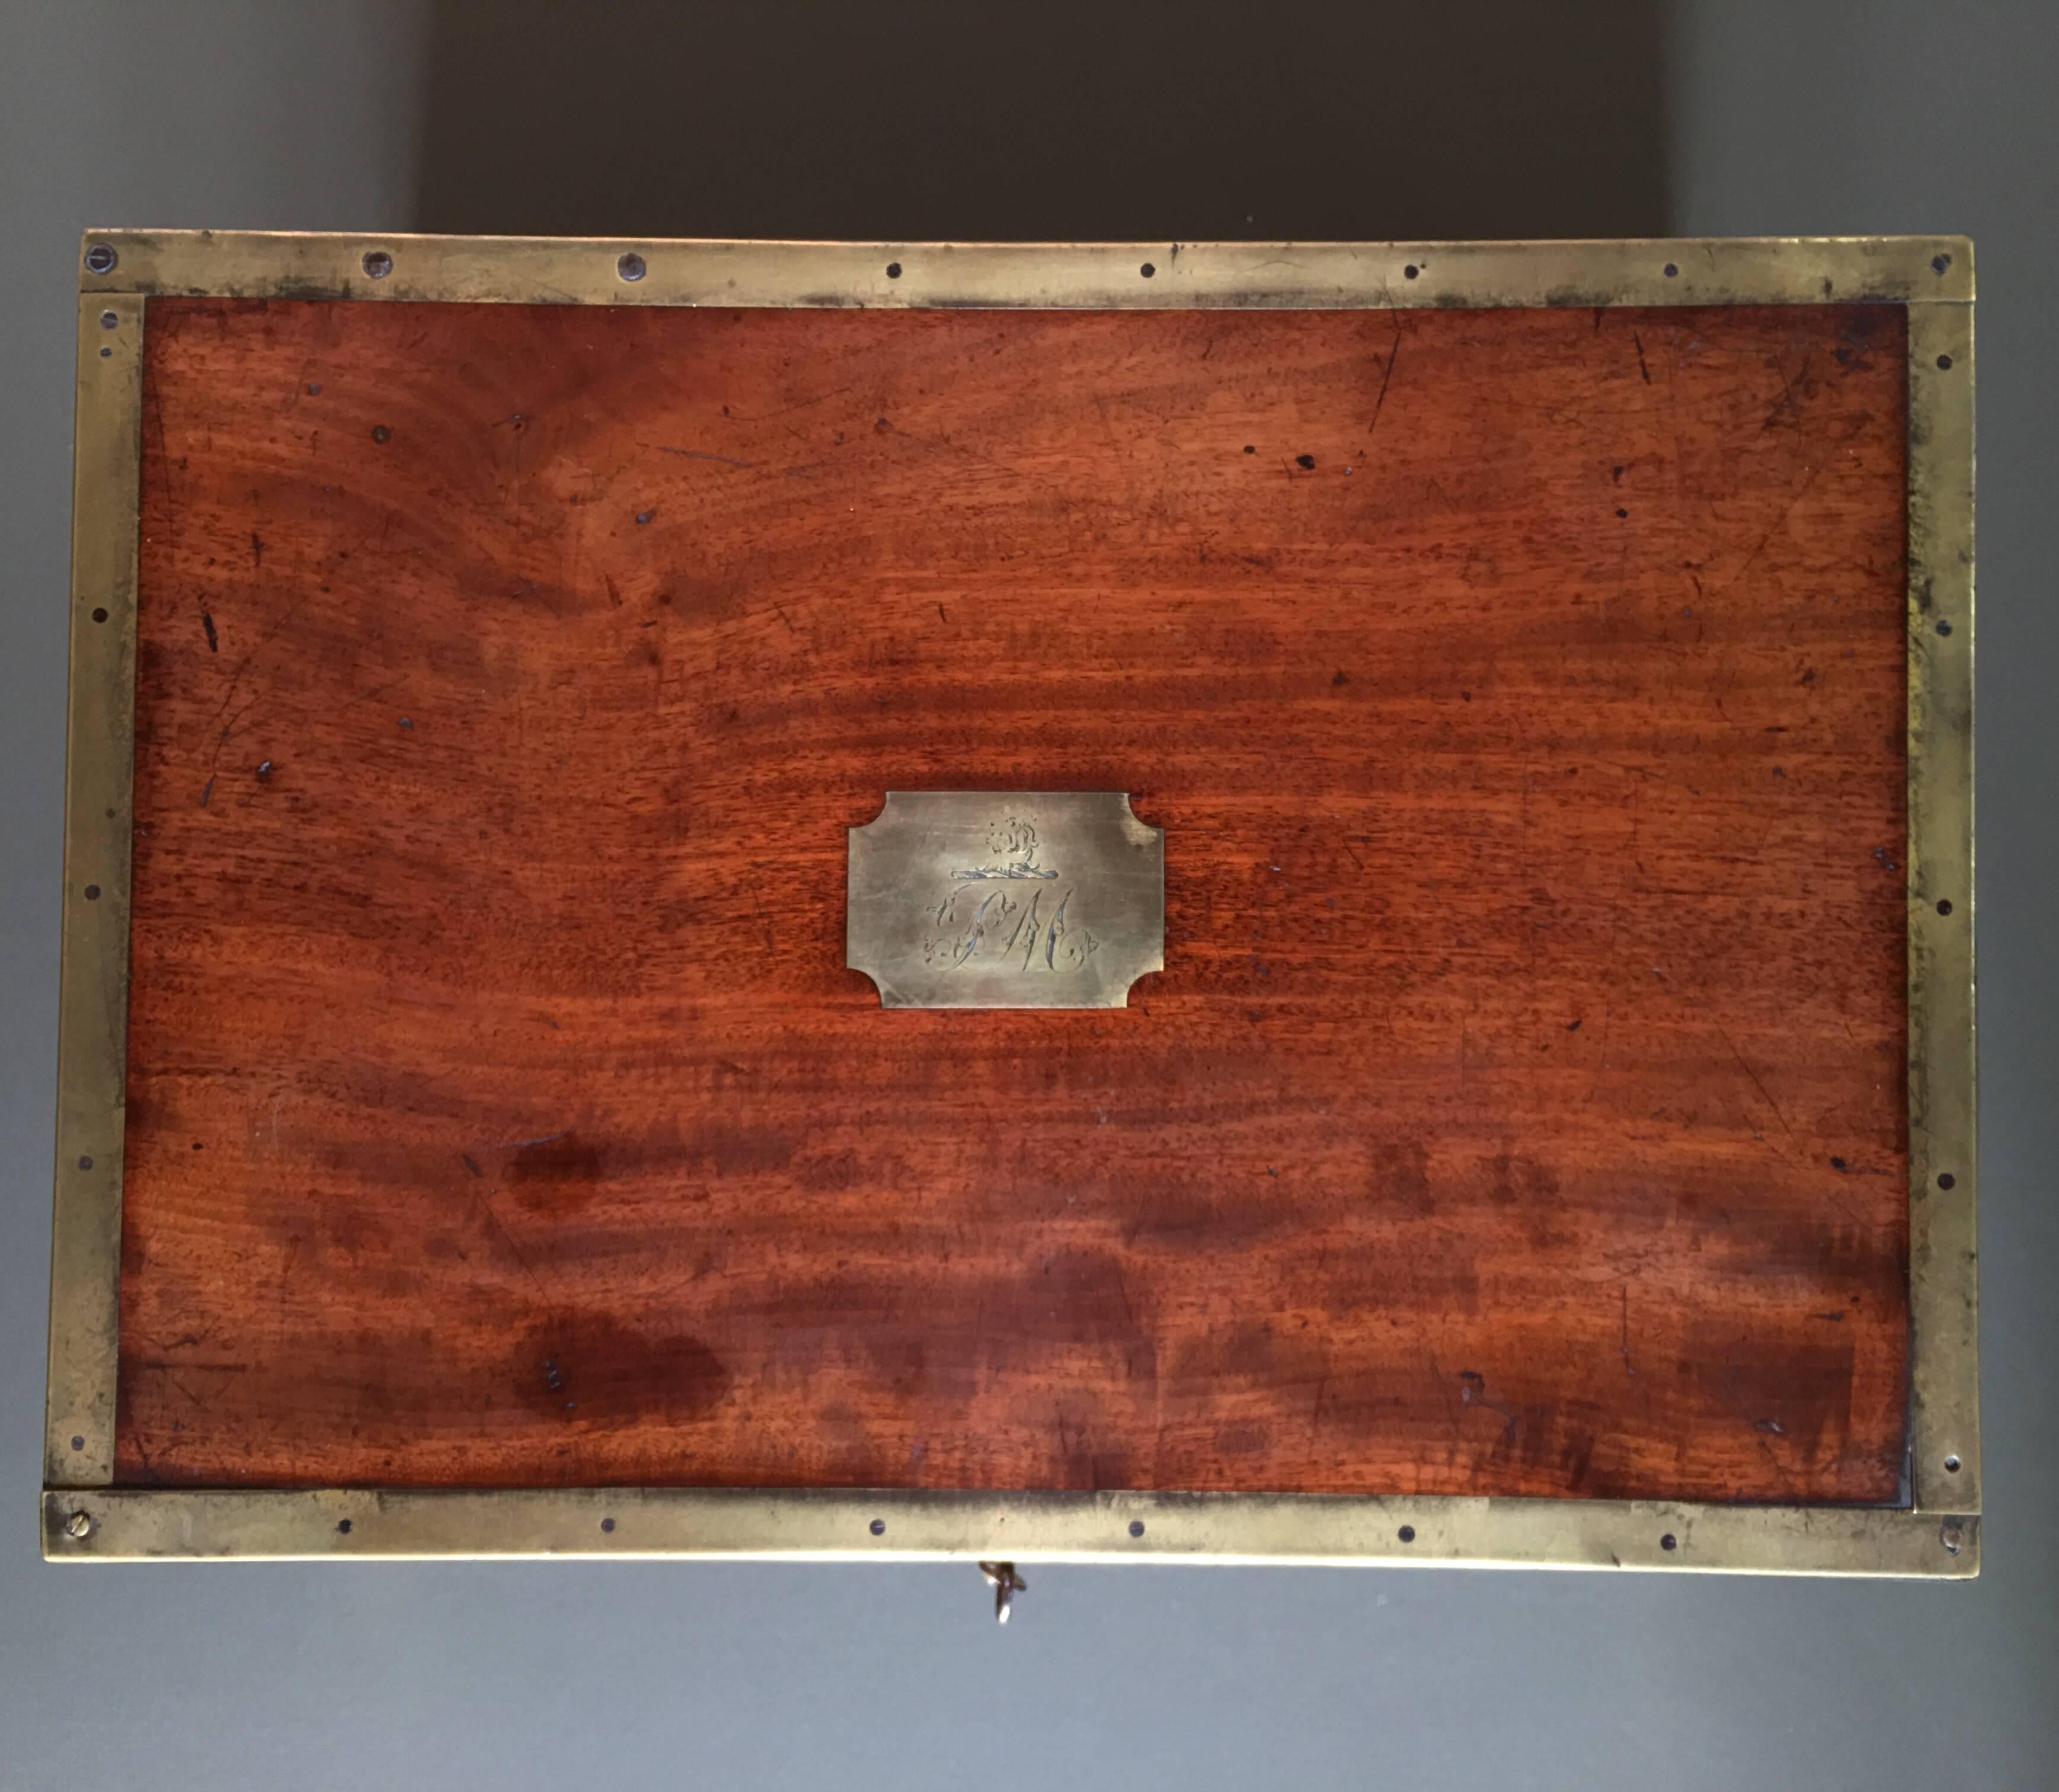 Major-general sir Peregrine Maitland's mahogany document box, with recessed handles and reinforced brass edges, the central plaque inscribed 'PM' beneath a family crest, with central leather lined compartment and hinging lid compartment, a slide out